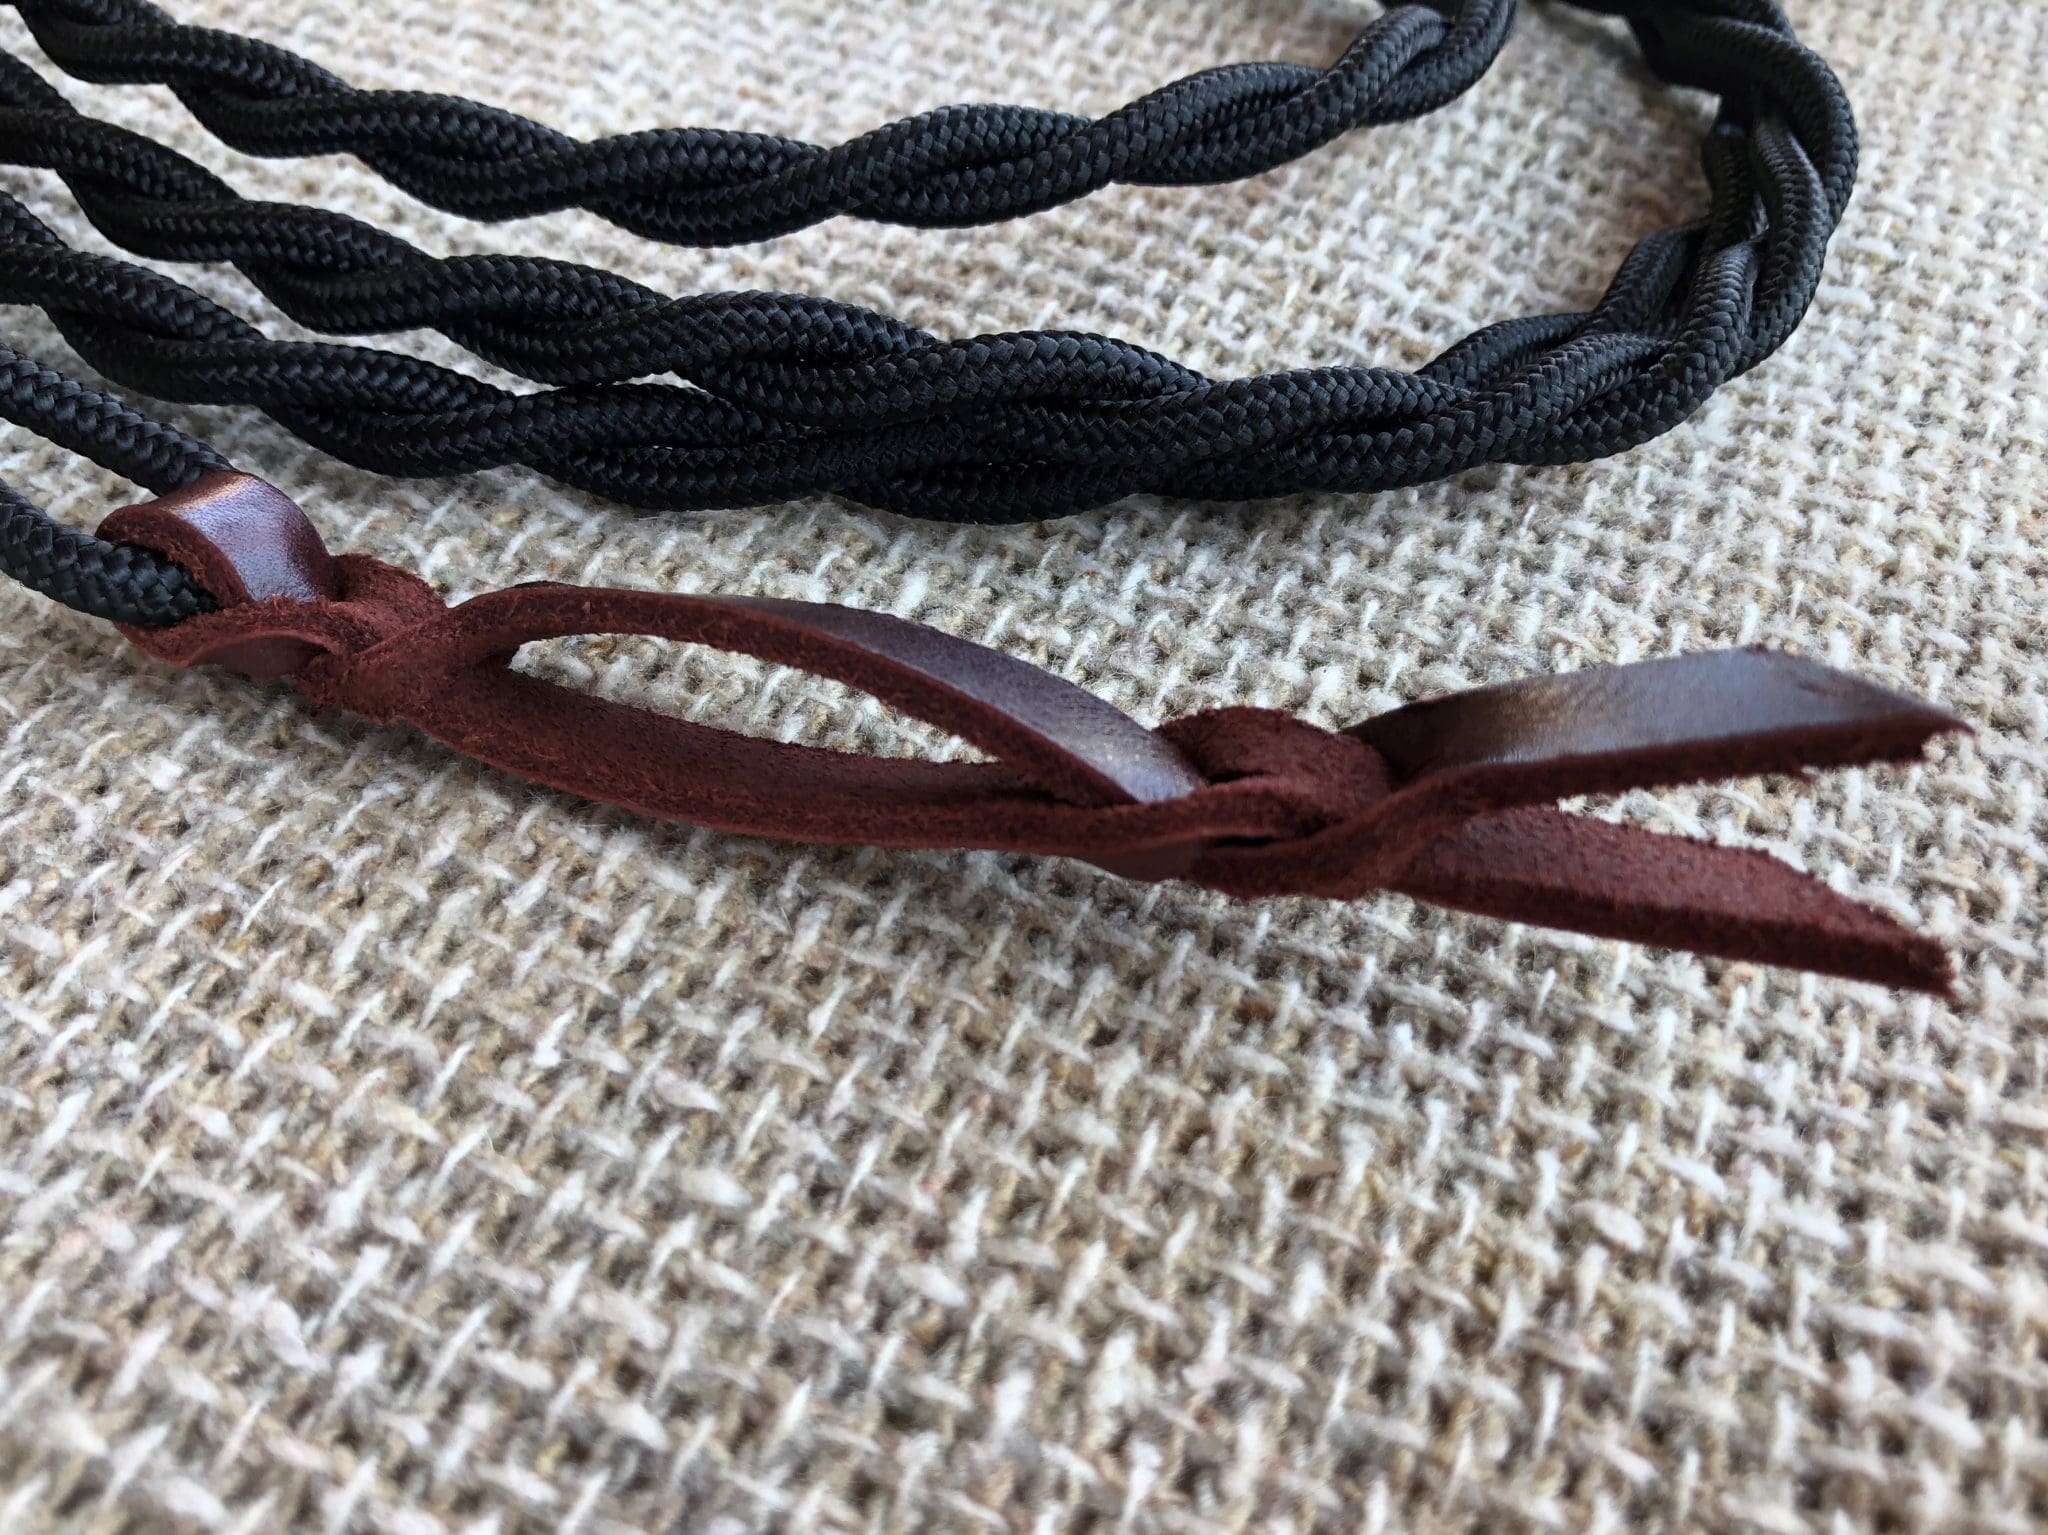 Neck Rope for Bridleless Riding | Julie Goodnight Shop